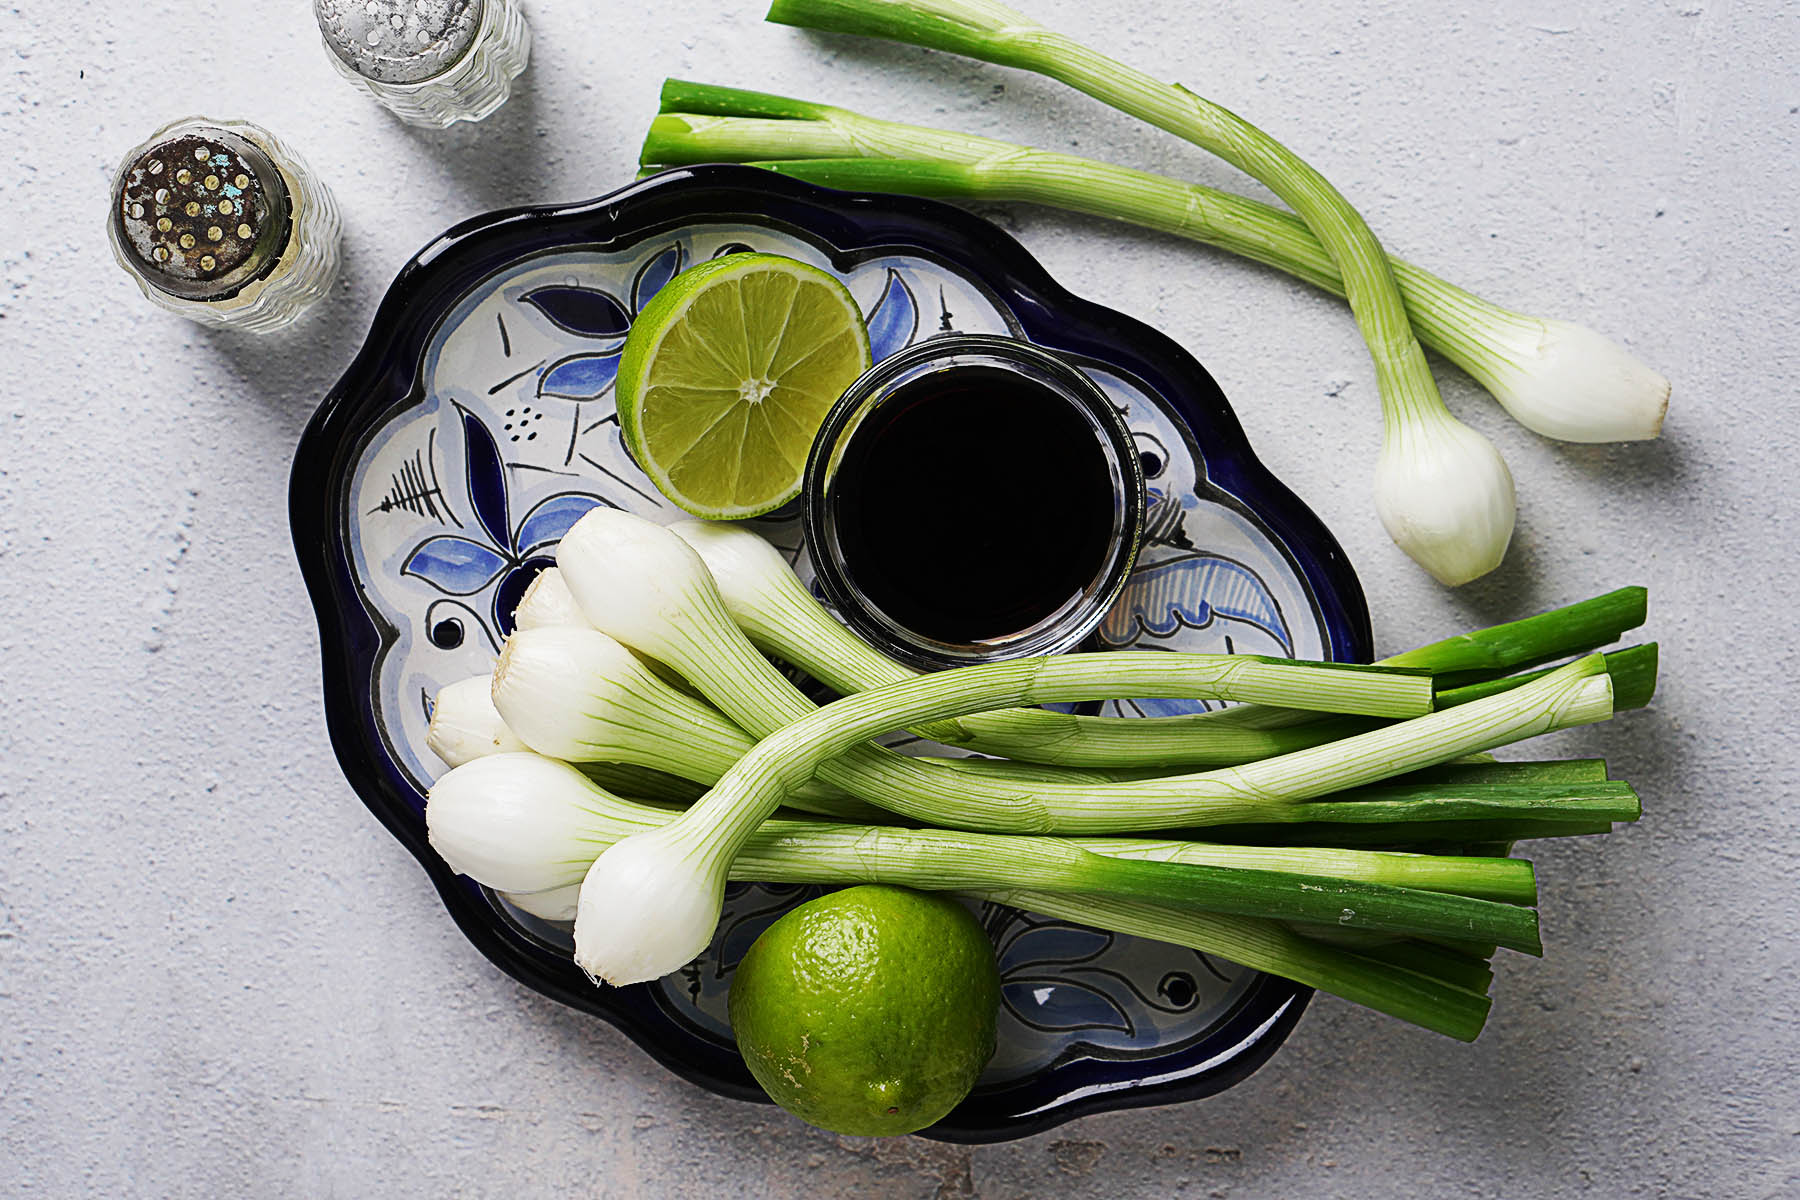 Raw green onions on a blue plate with soy sauce and a lime on the side